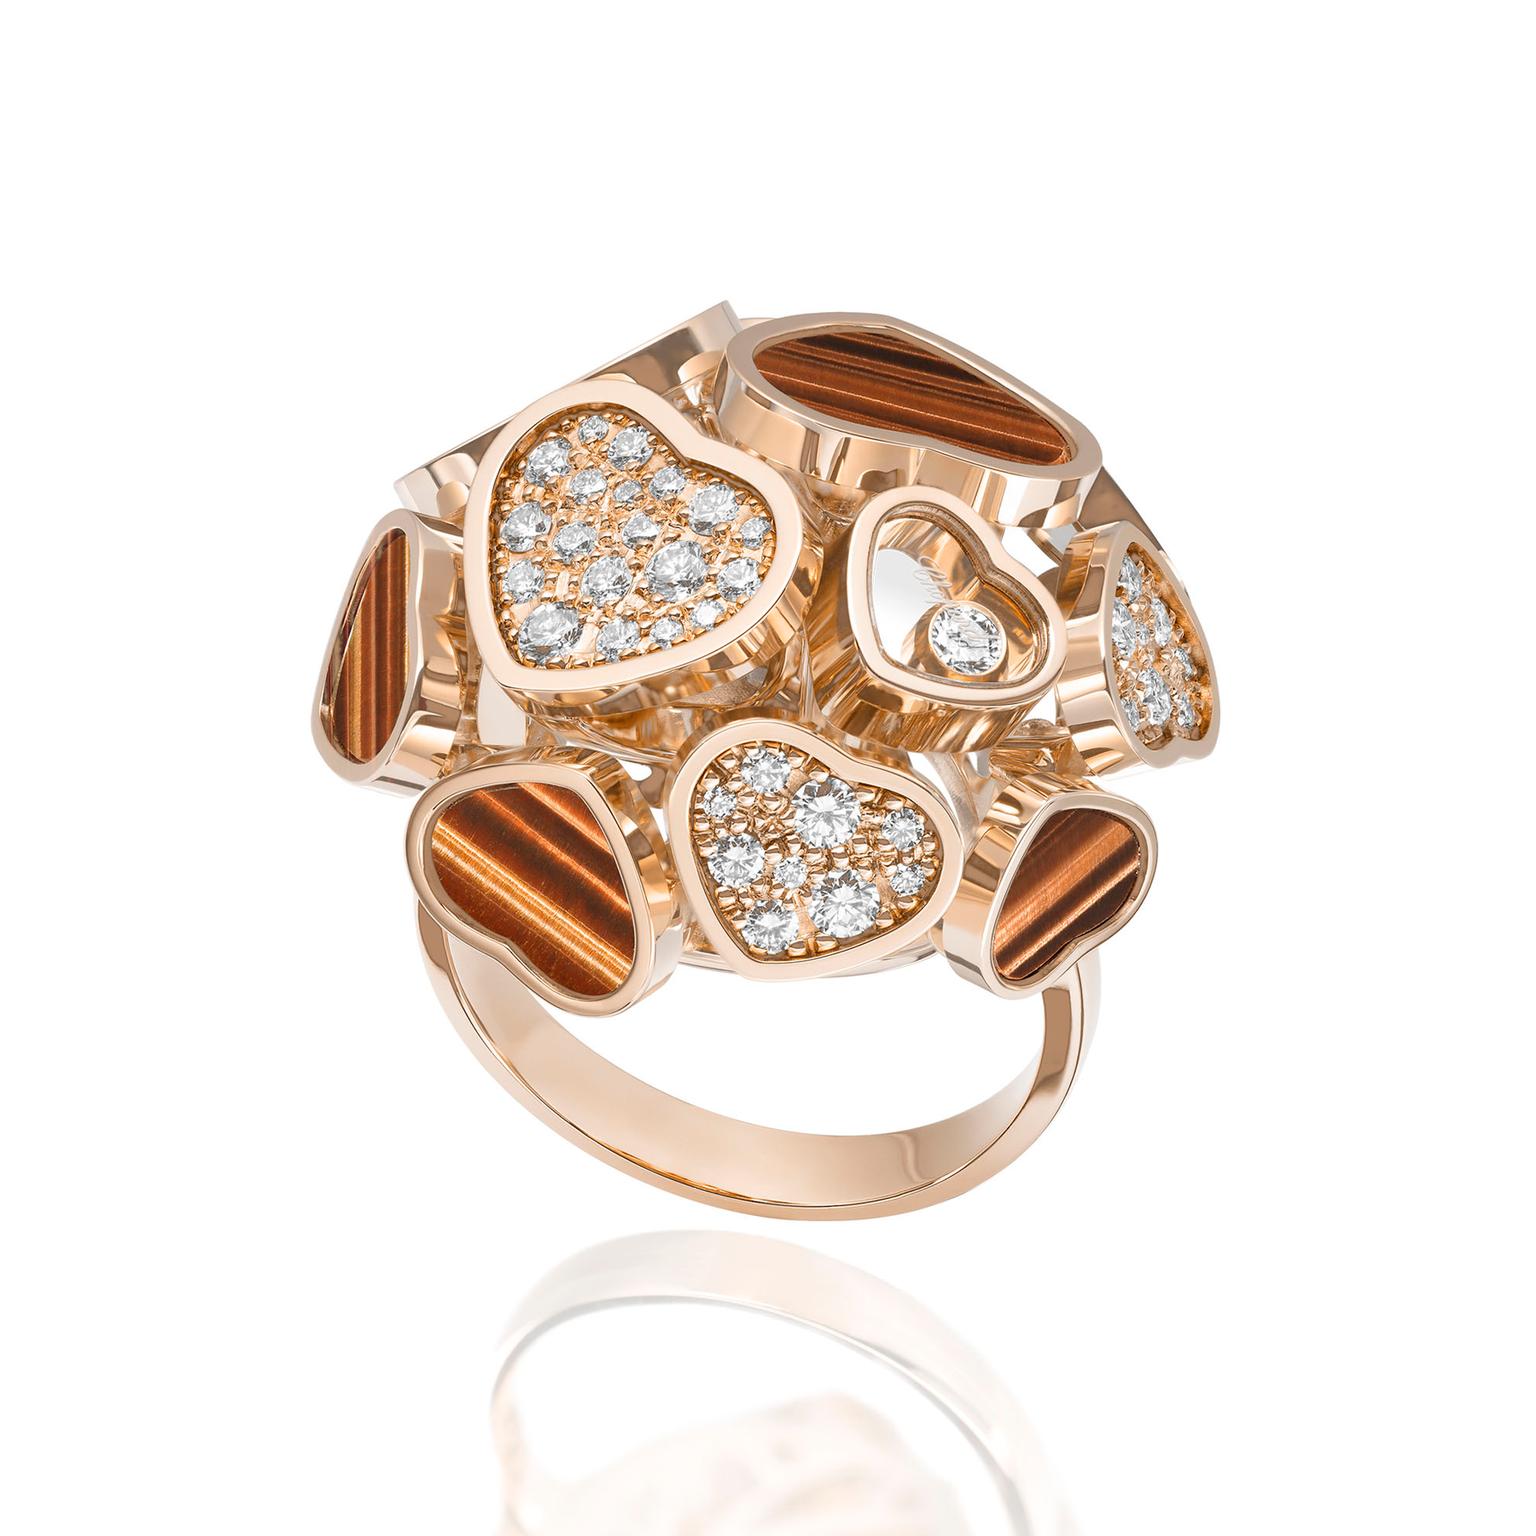 Chopard Happy Hearts ring with tiger's eye